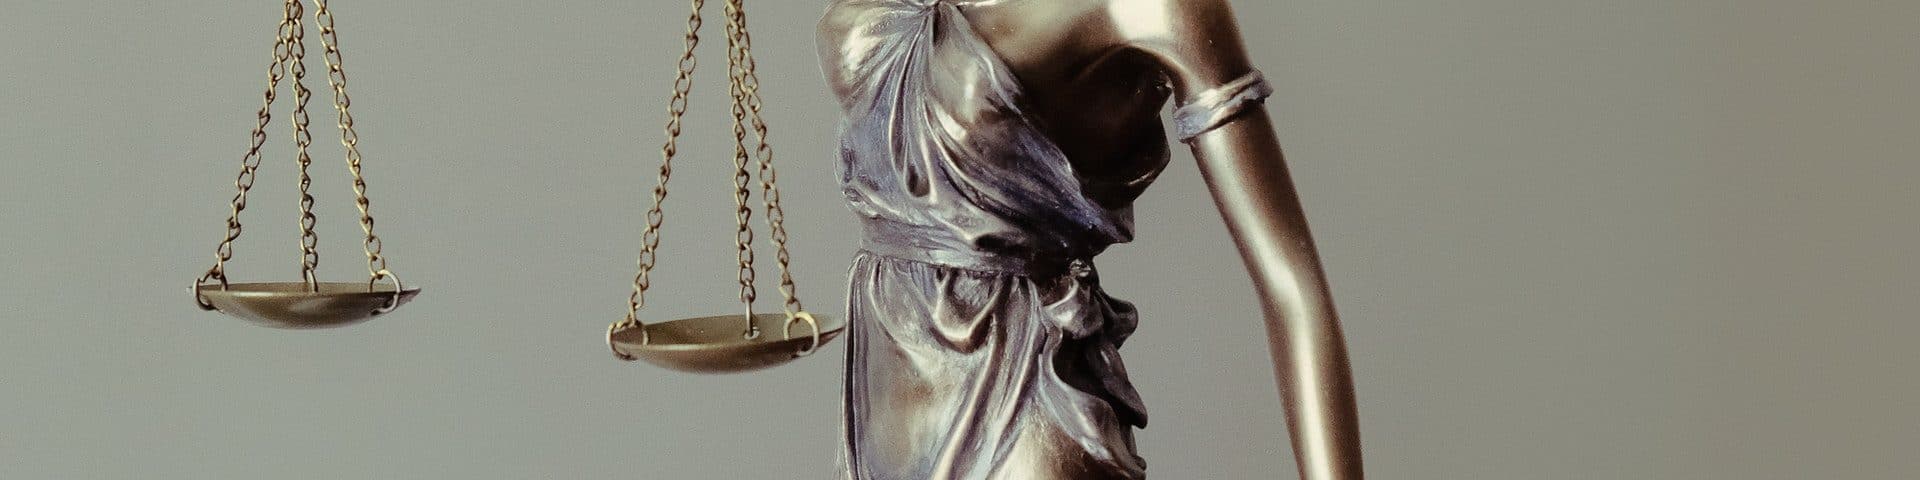 statue_lawyer (1)